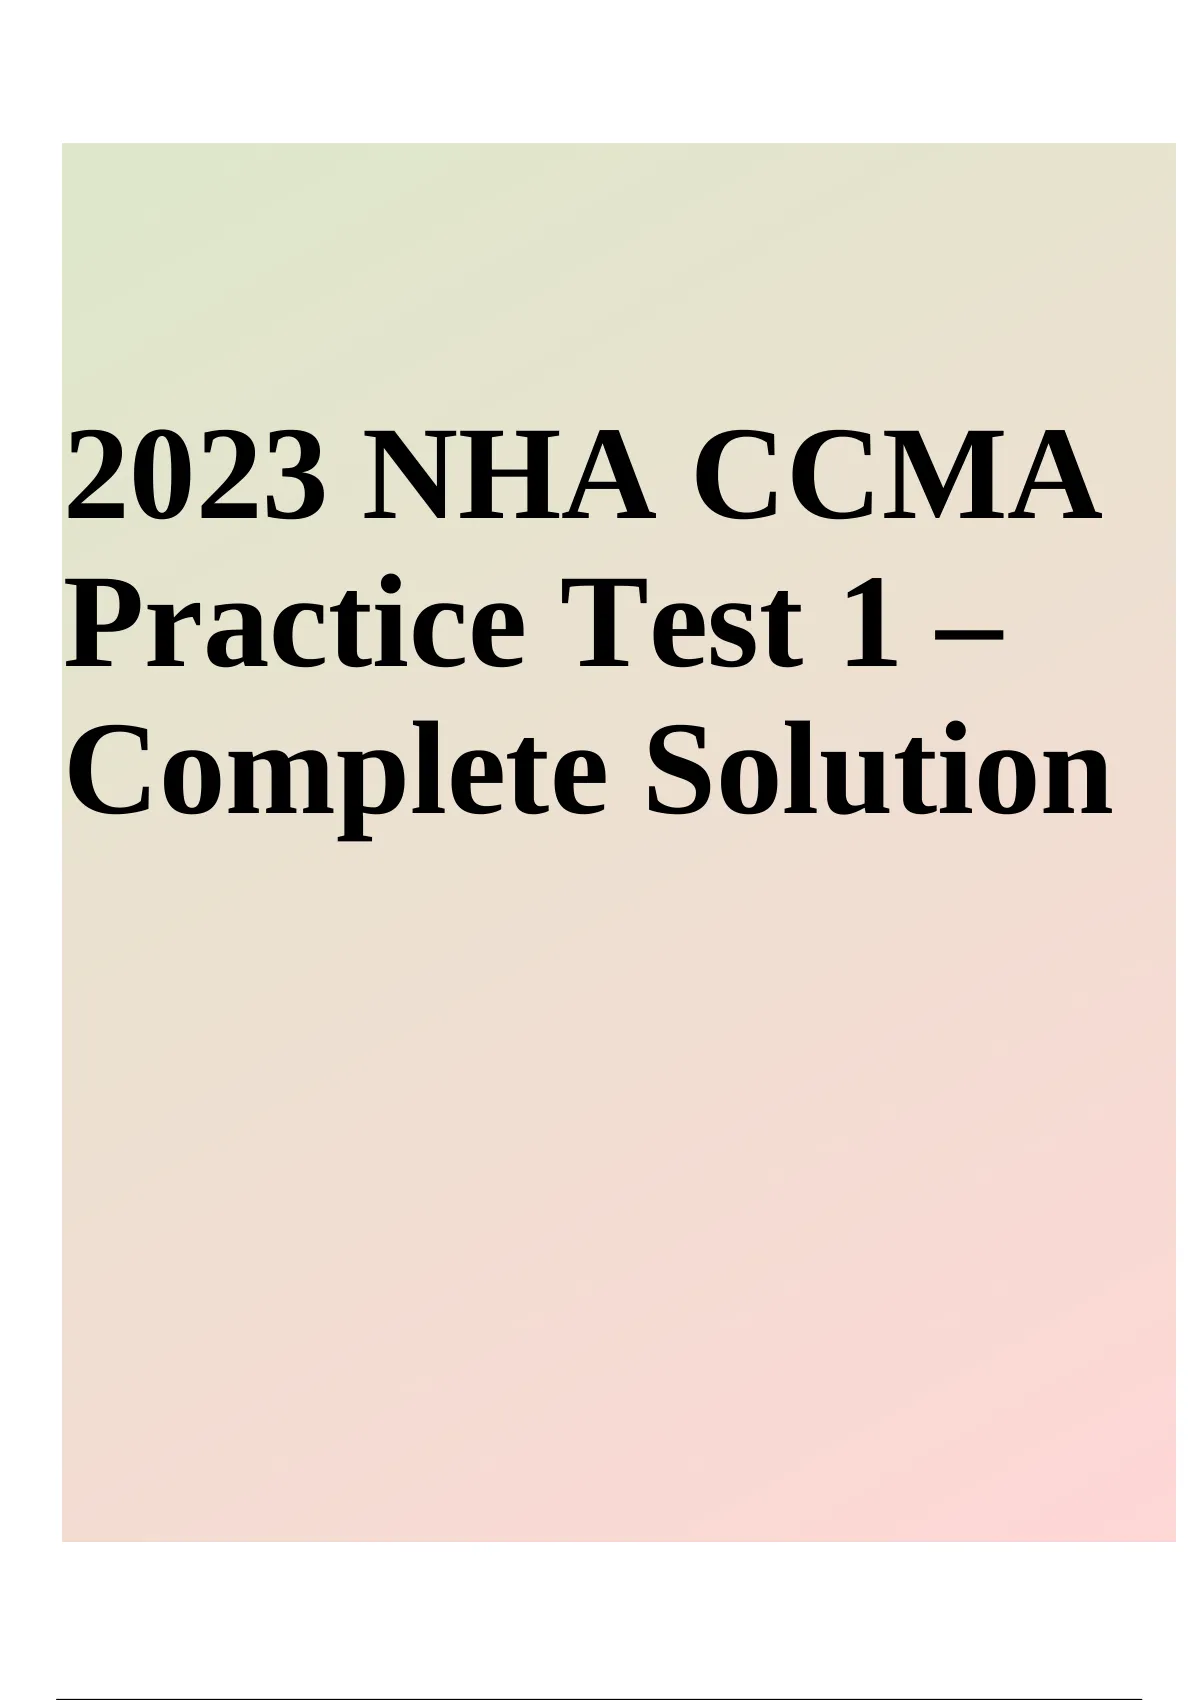 NHA CCMA 2023 EXAM Questions and Answers Score 100 Actual Test